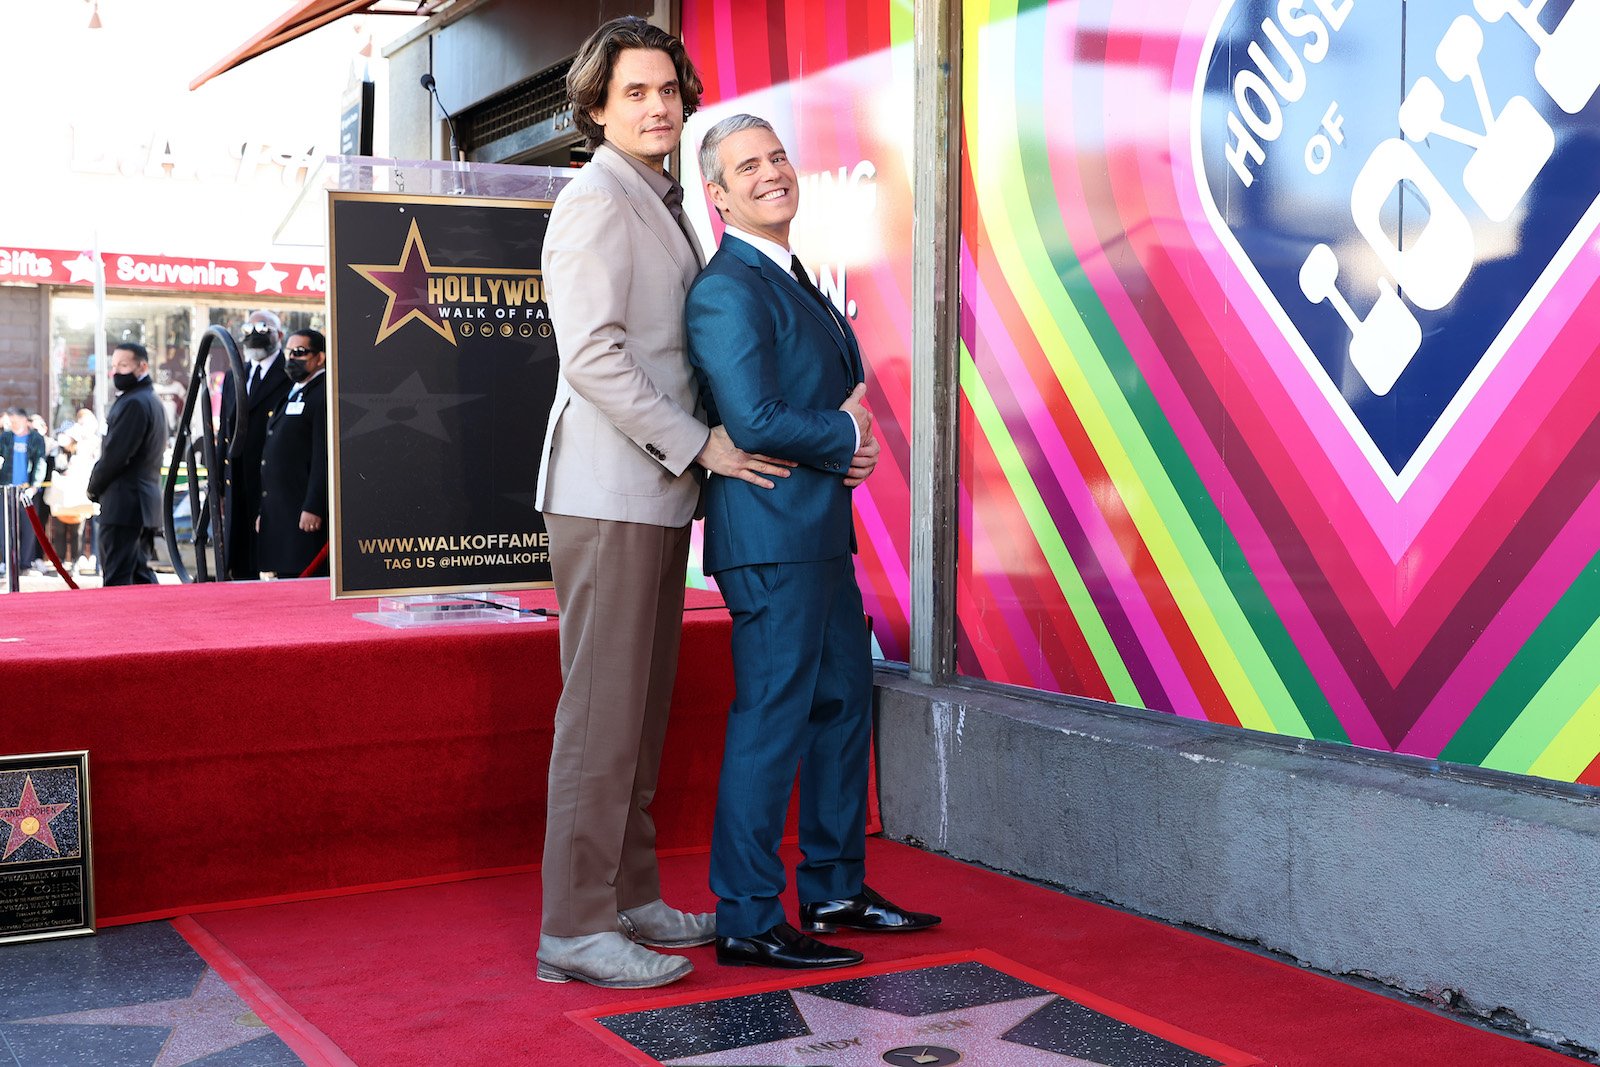 John Mayer and Andy Cohen attend the Hollywood Walk of Fame Star Ceremony